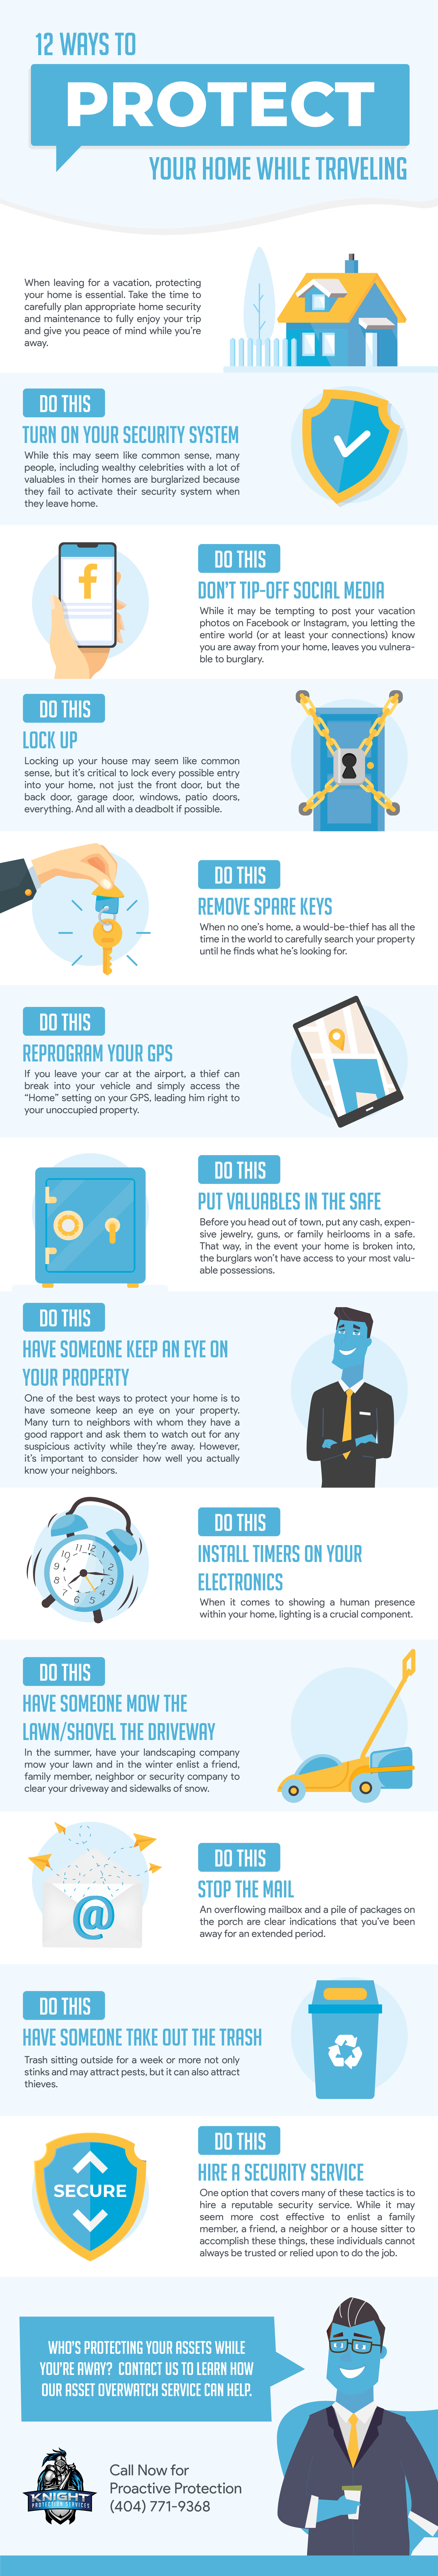 knight-protection-services-12-ways-to-protect-your-home-while-traveling-infographic